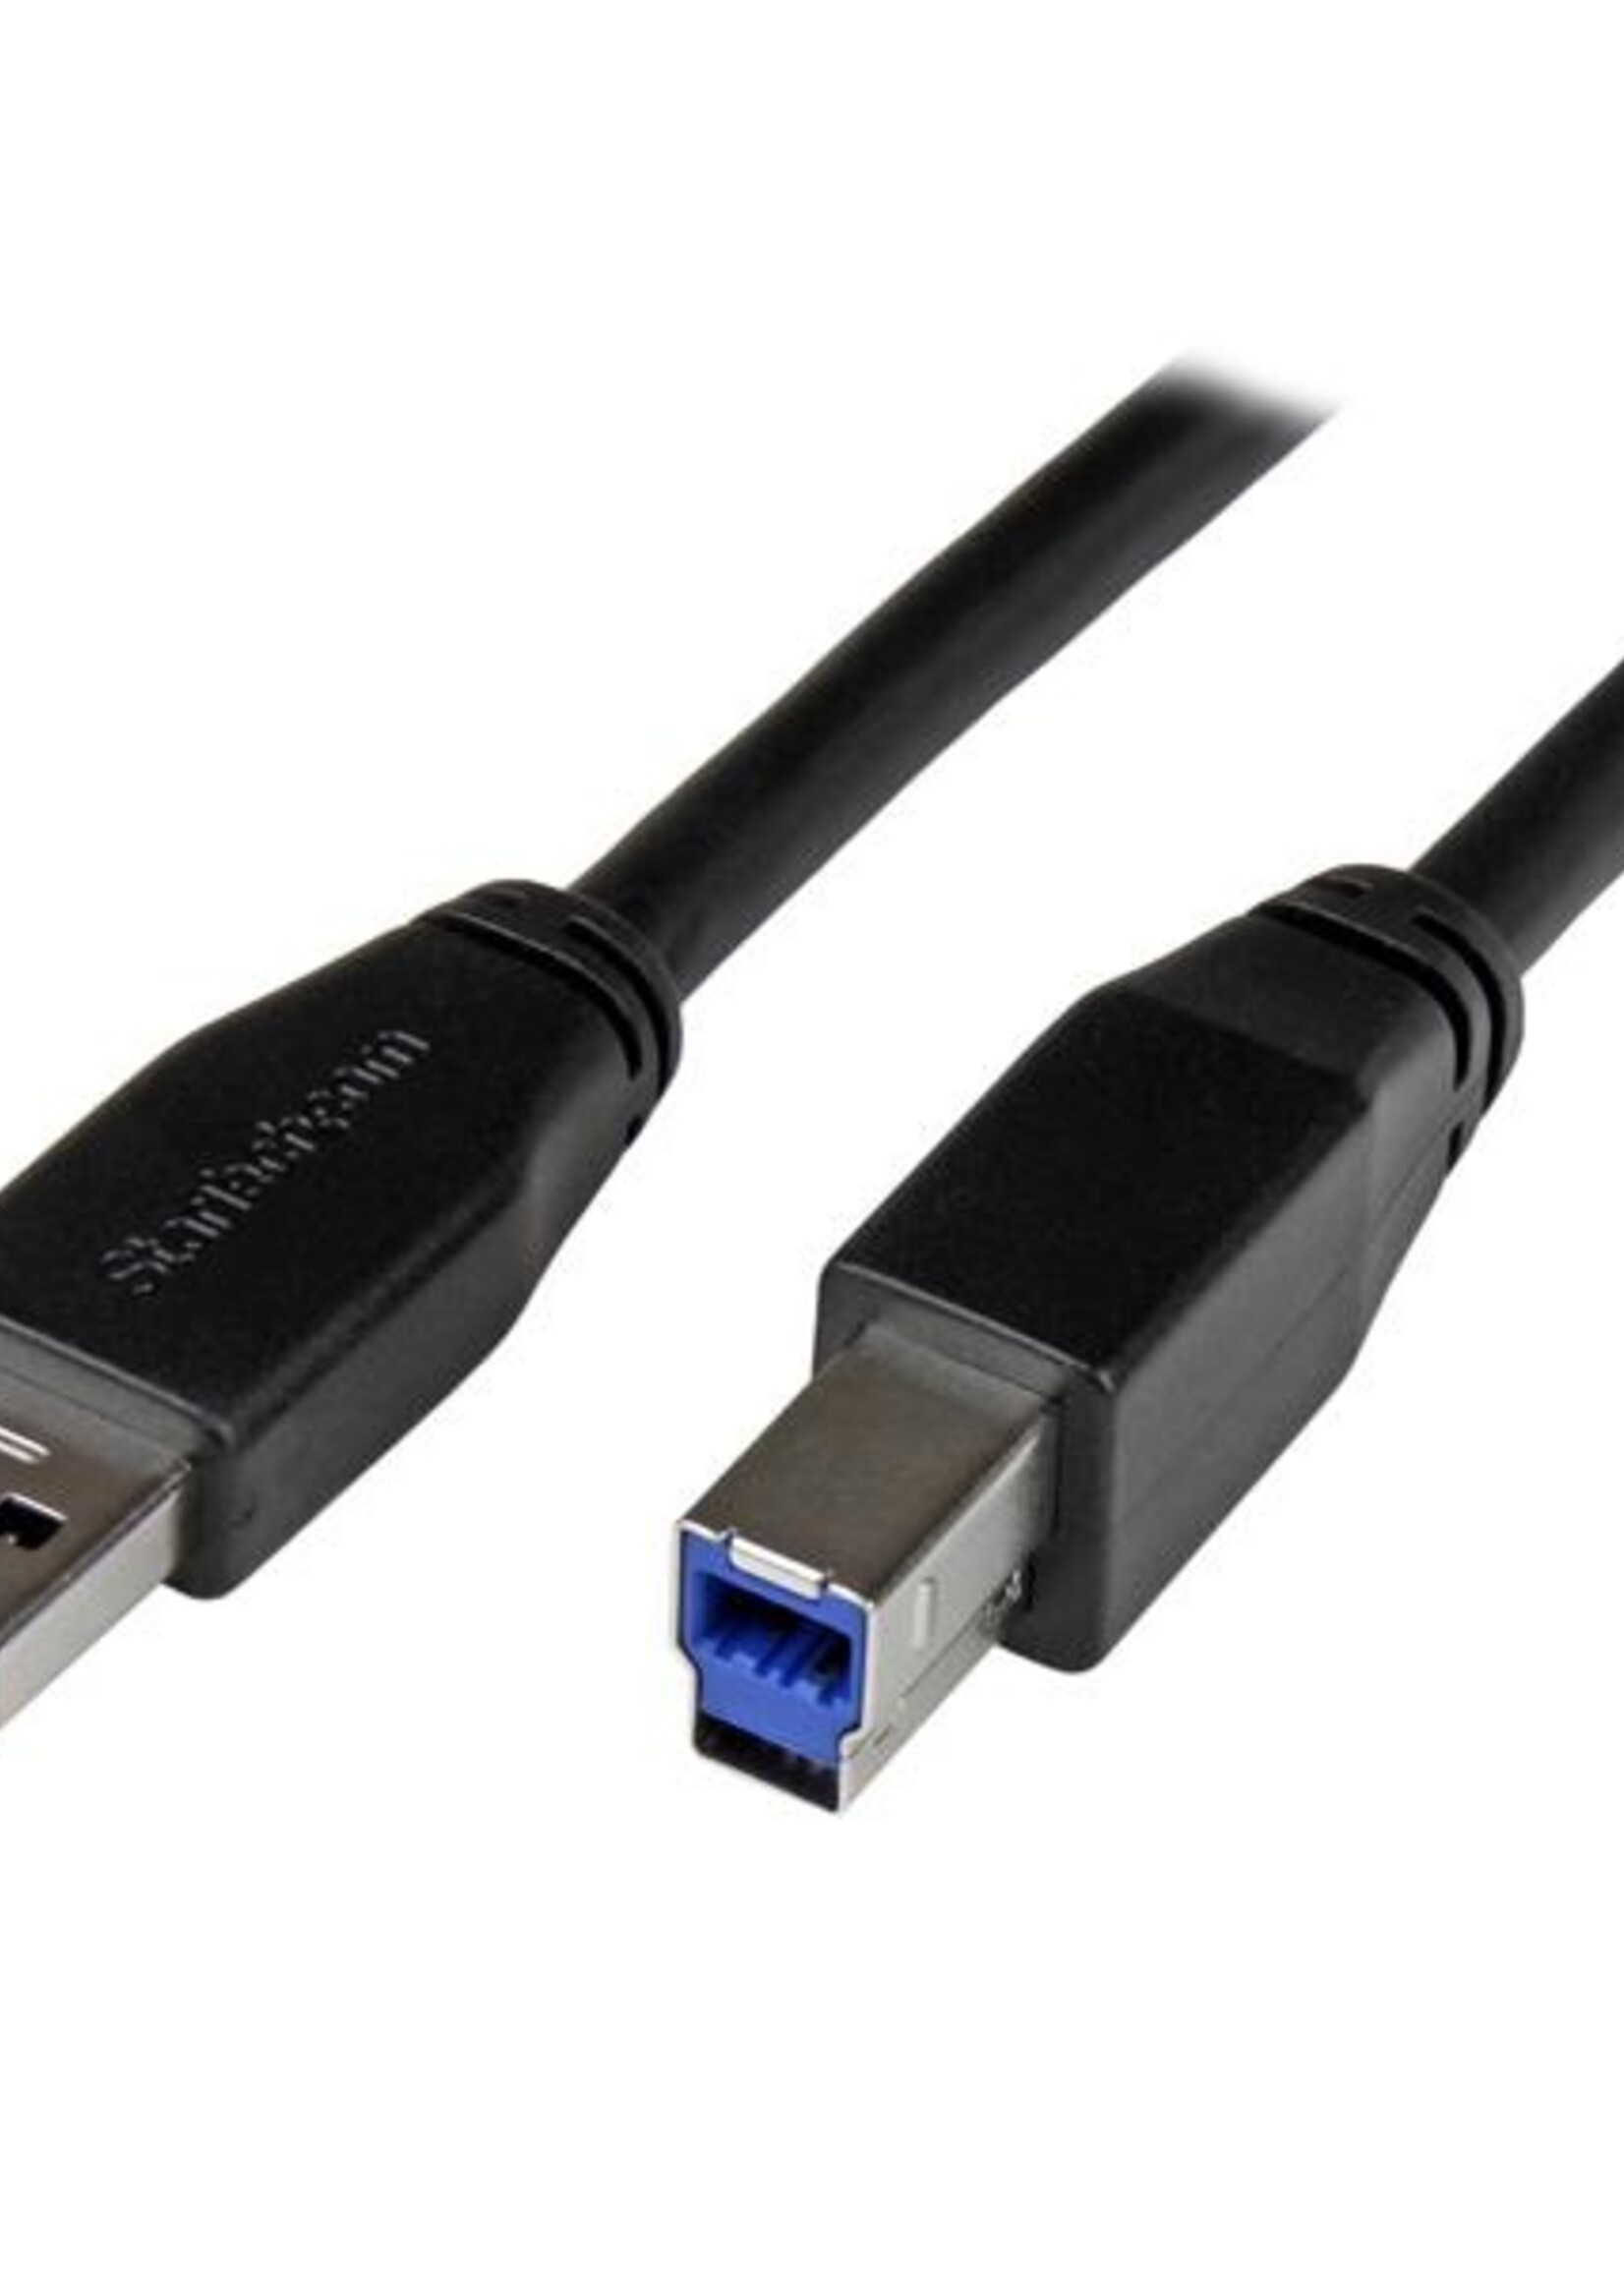 15ft Active USB 3.0 USB-A to USB-B Cable